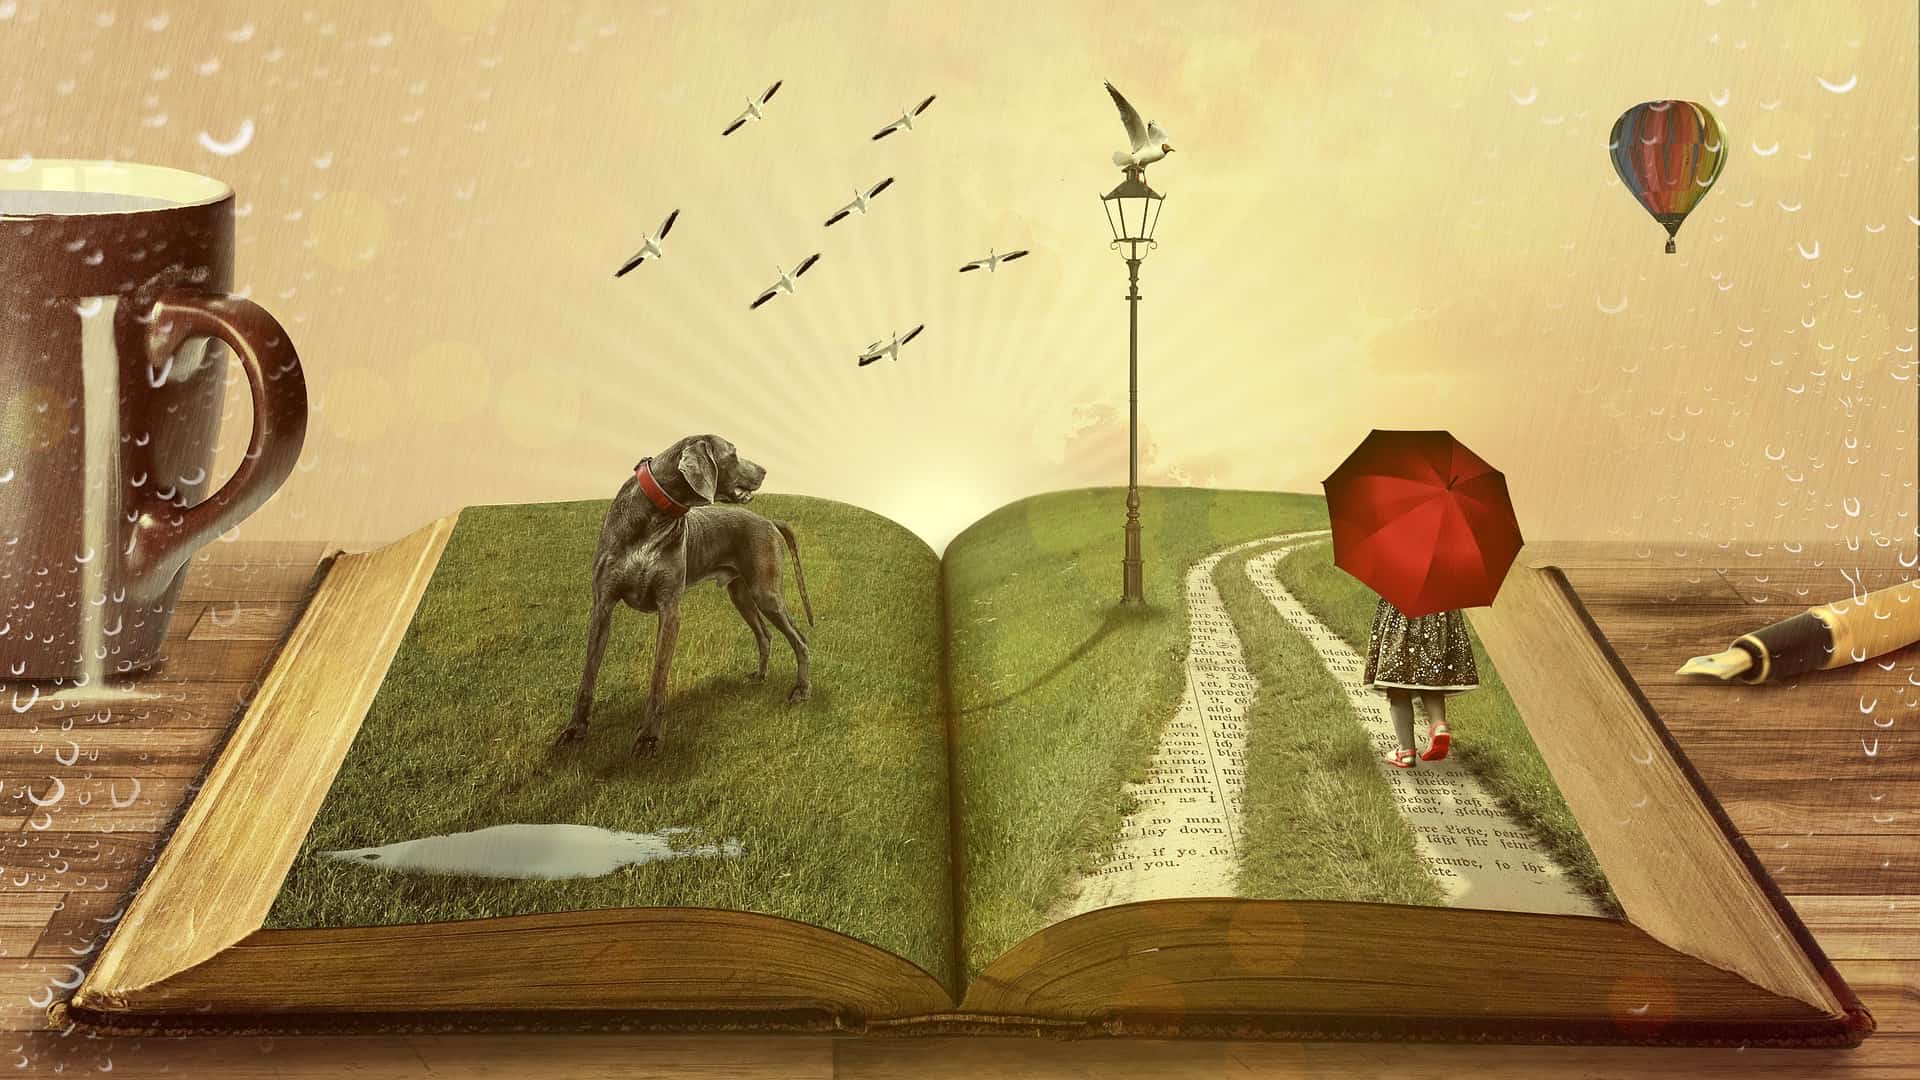 An illustration of an open book with the characters inside coming to life on the pages including a dog and person with red umbrella.